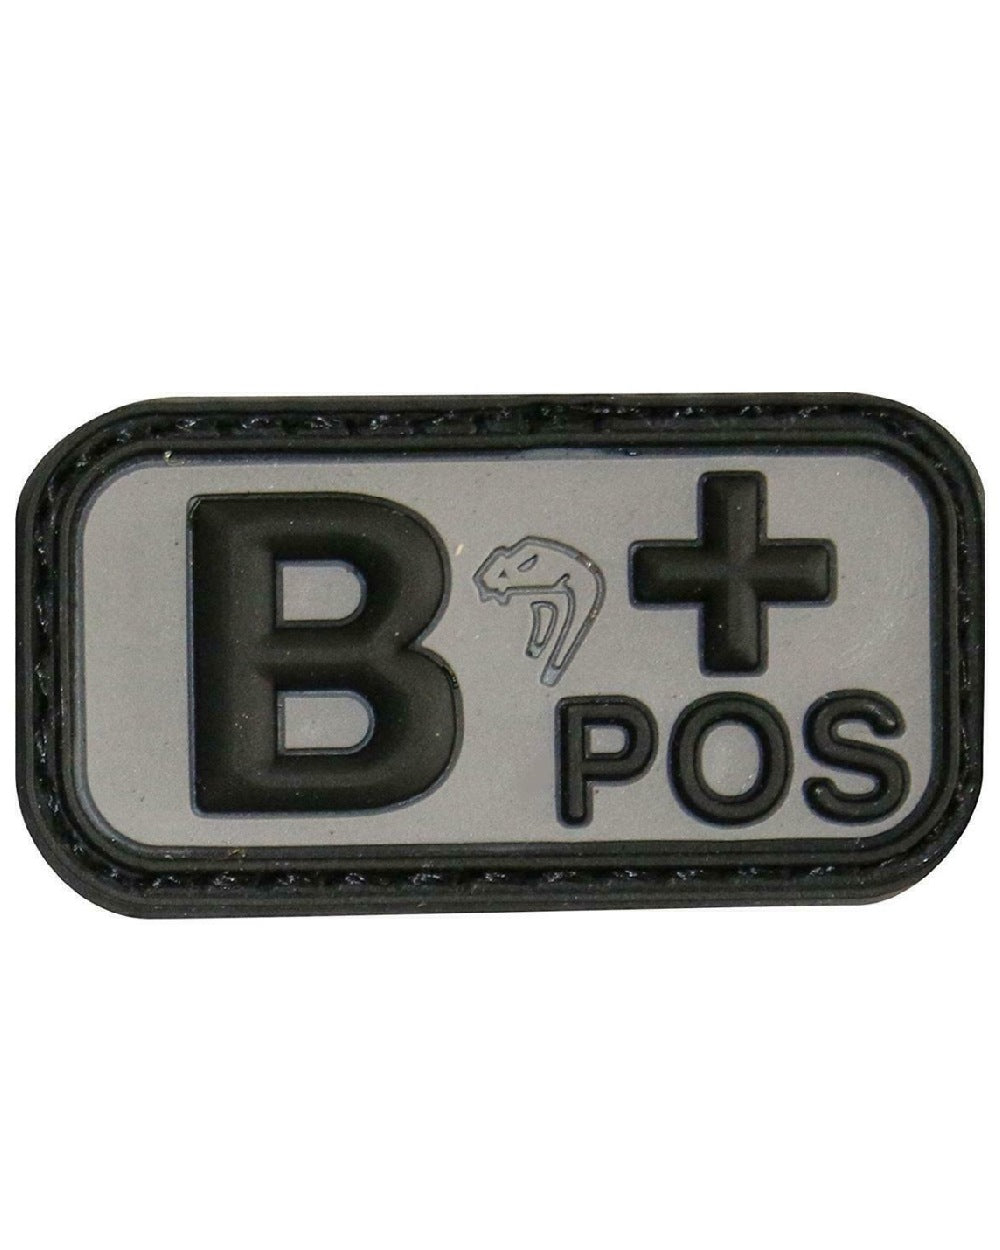 Viper Blood Group Rubber Patch B Pos in Black 